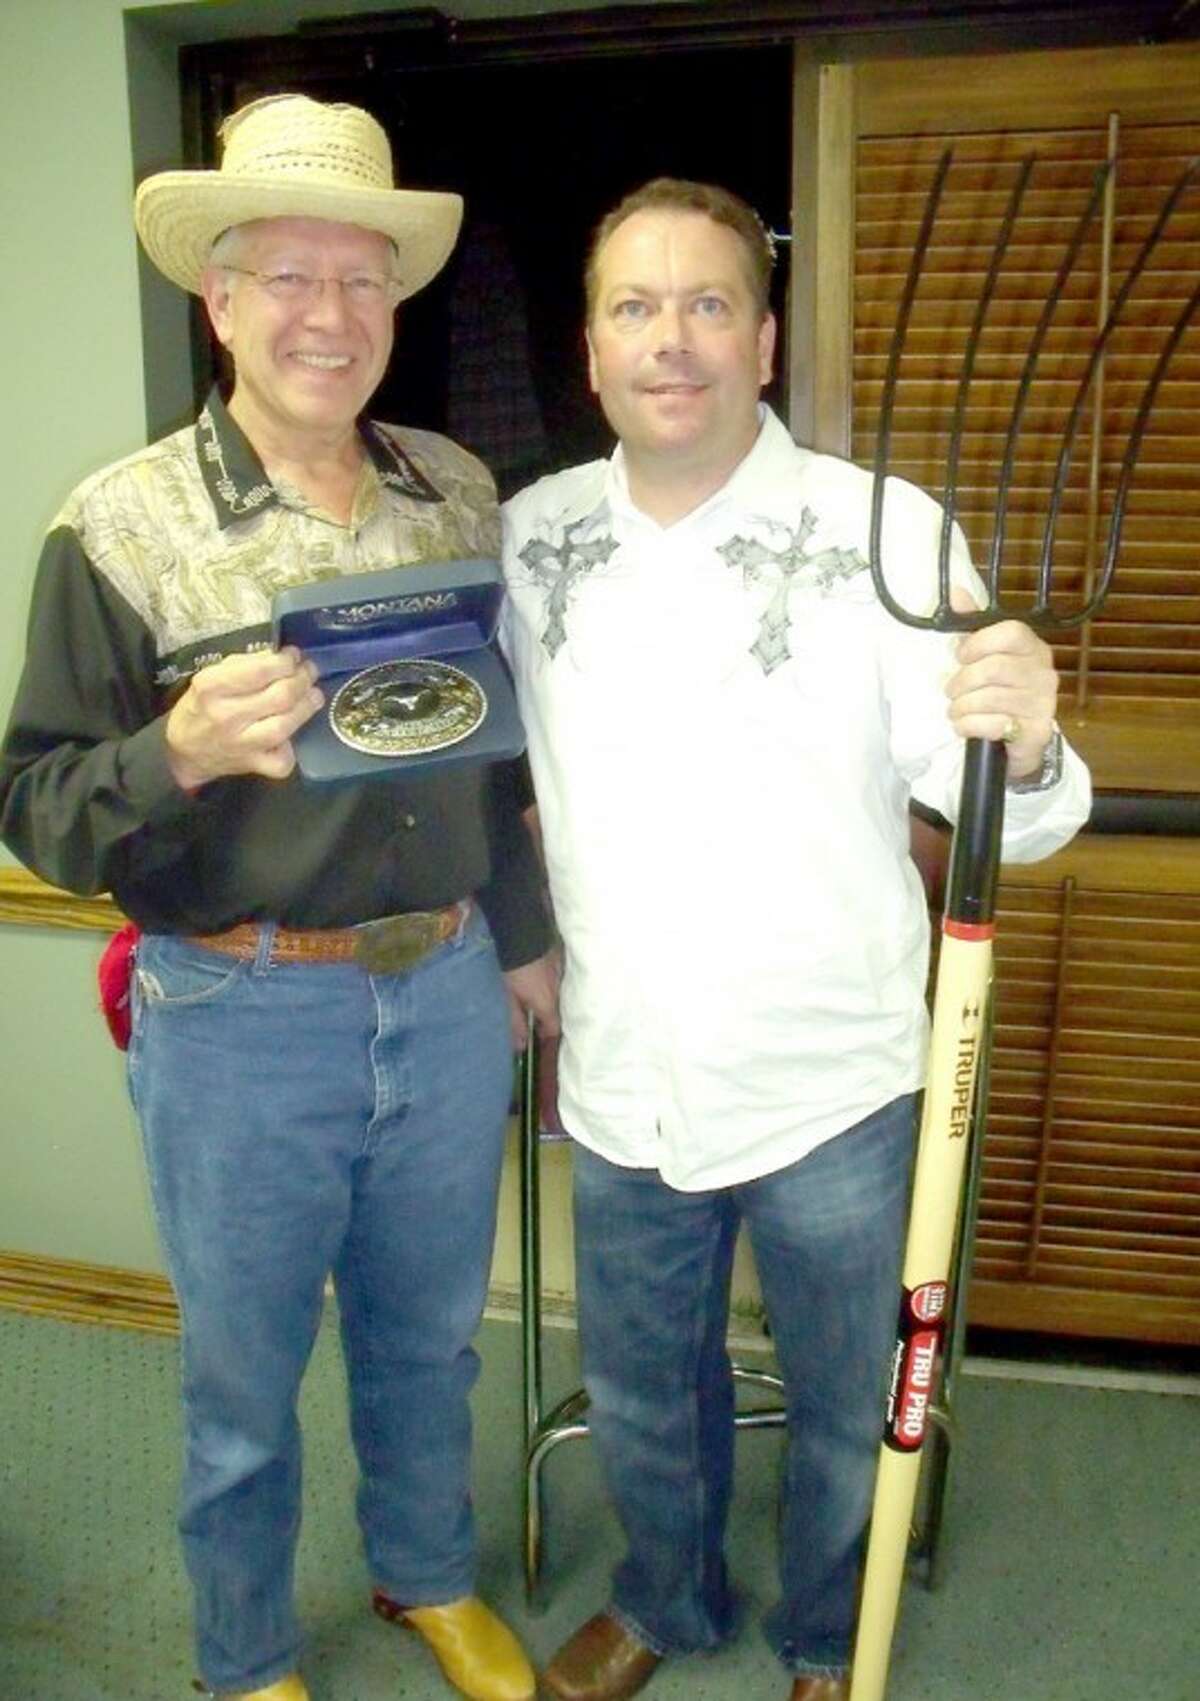 In this 2010 file photo, Charles “Salty Dog” Starnes (left), representing Pakmail Co. of Plainview, shows off the belt buckle he received for winning the Trail Boss Shoot Out Contest and a place at the head of this Saturday’s Cowboy Days Parade. Beside him is Anthony Brocato, from PNS/UMC Family Medical Care, with his “Trail Hand” pitchfork. As last-place finisher, Brocato will bring up the rear of the cattle drive and parade.